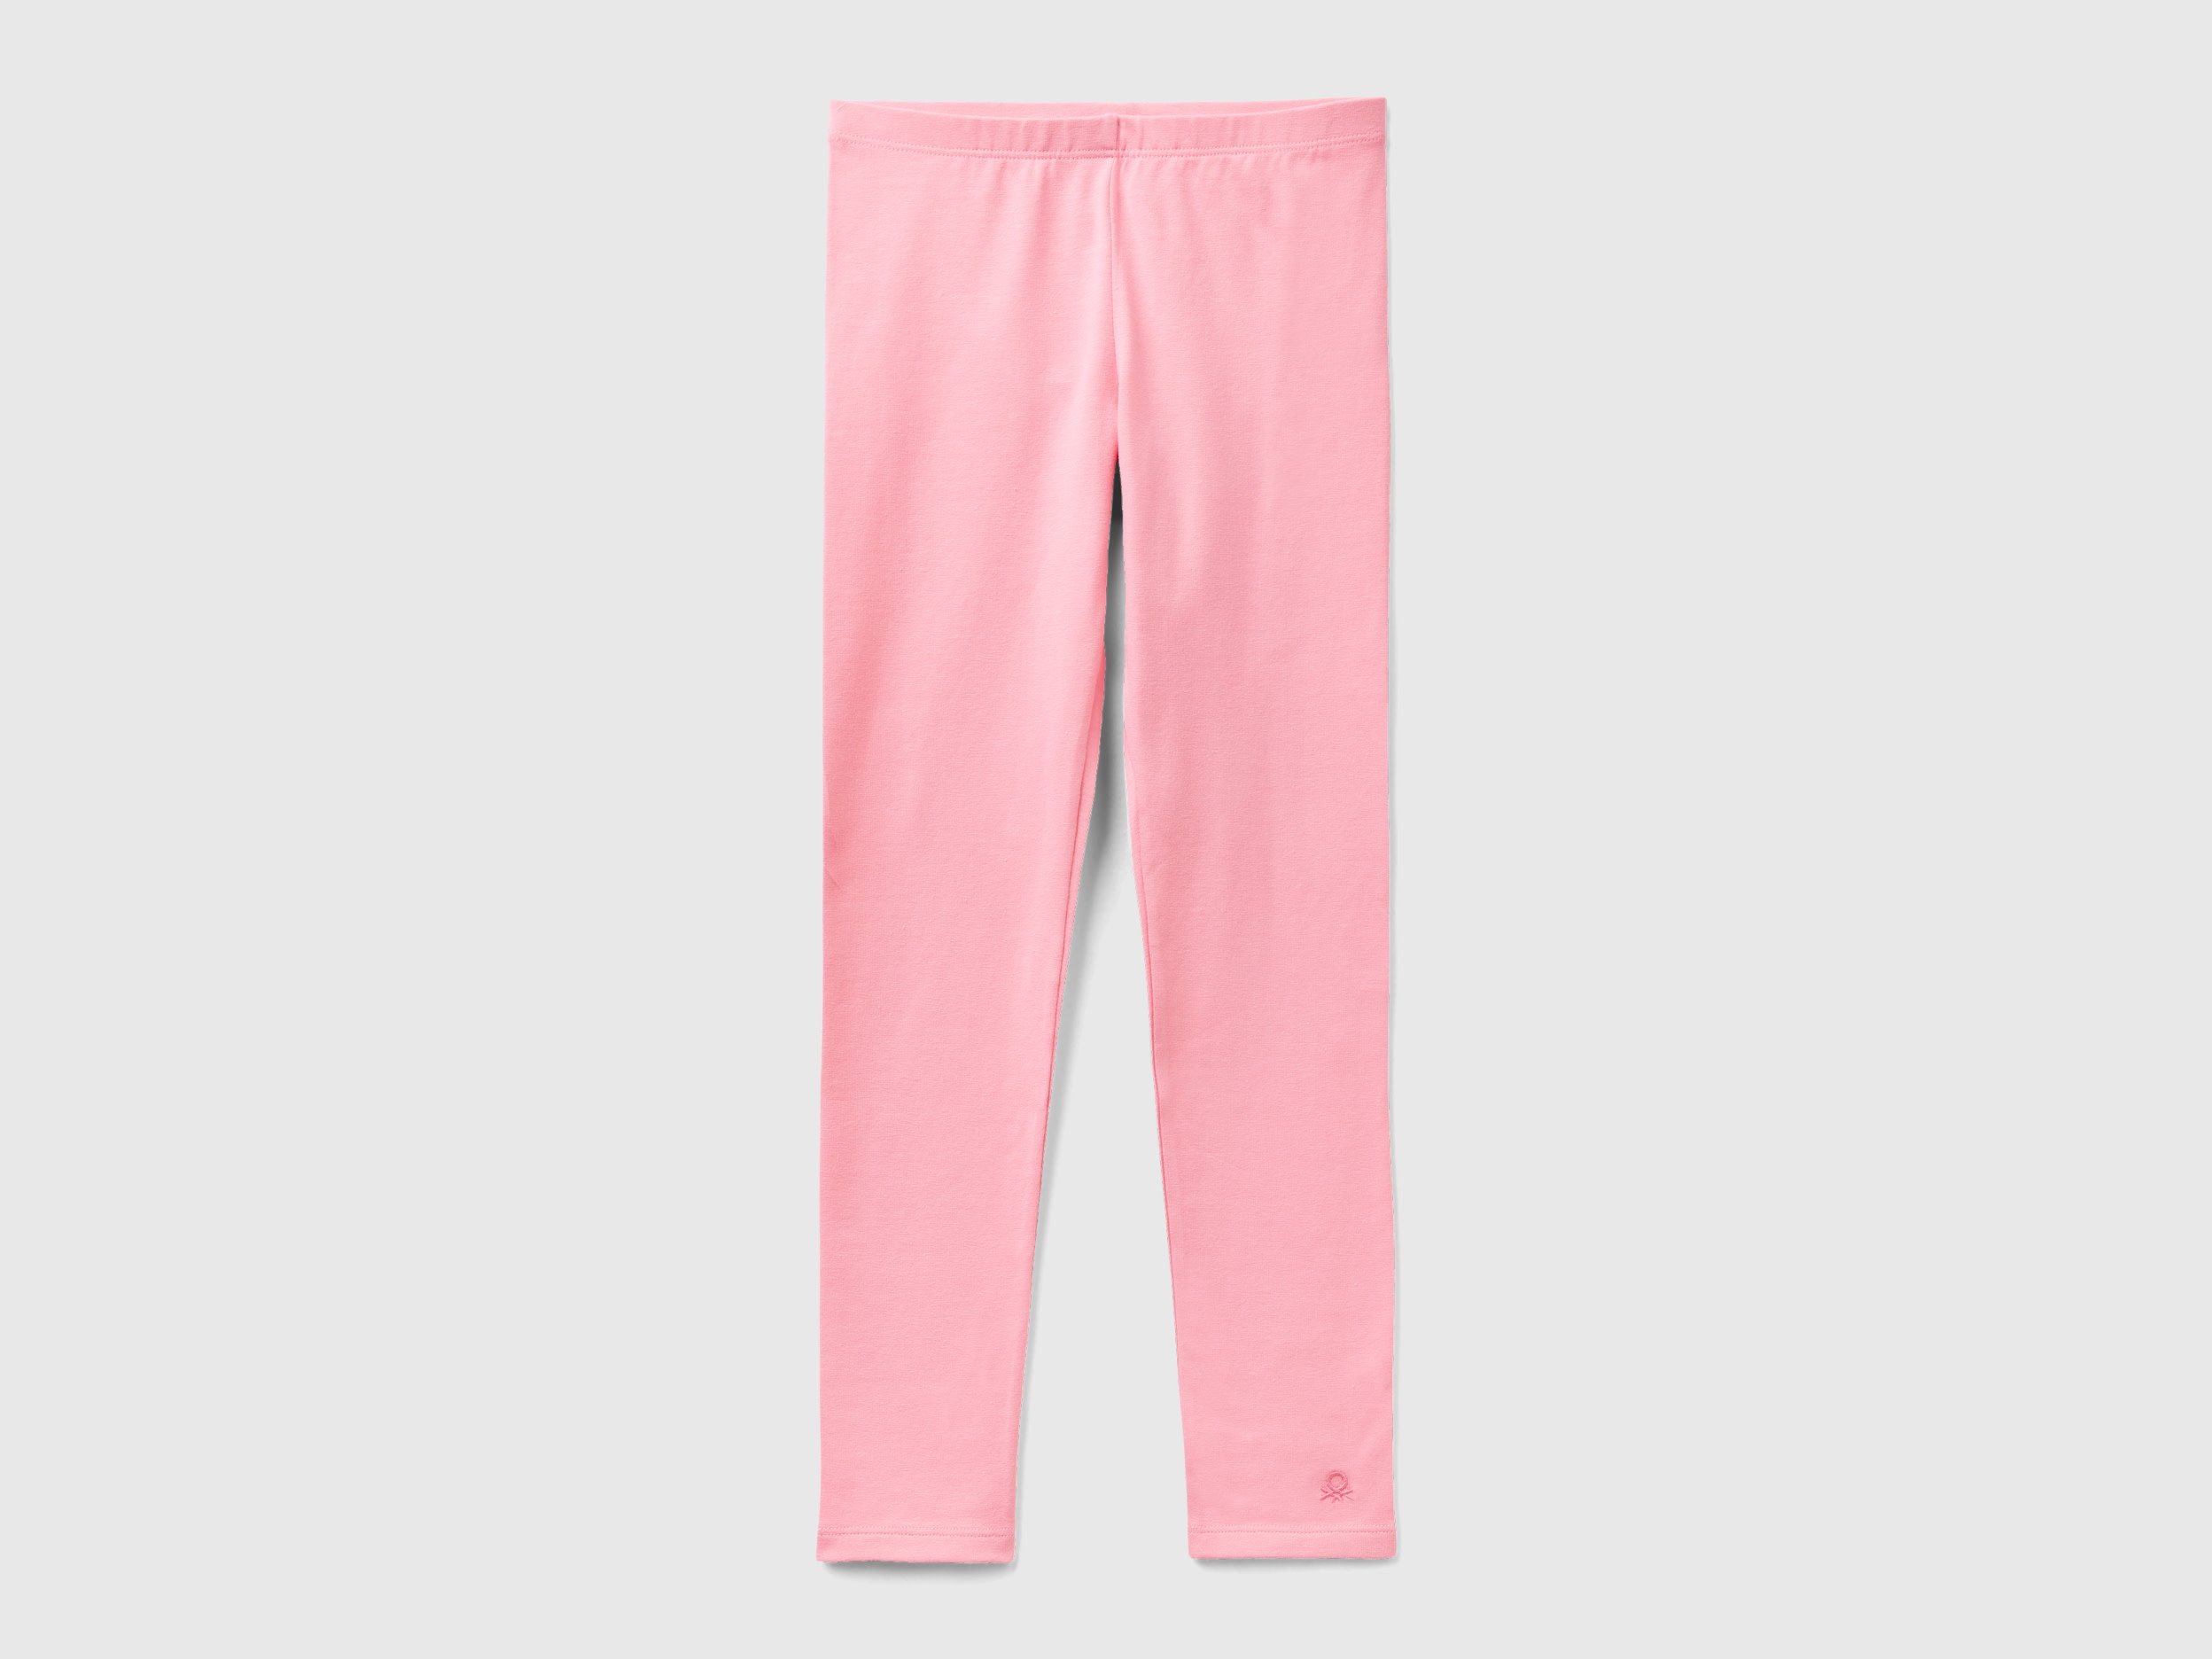 Benetton, Leggings In Stretch Cotton With Logo, size 3XL, Pink, Kids